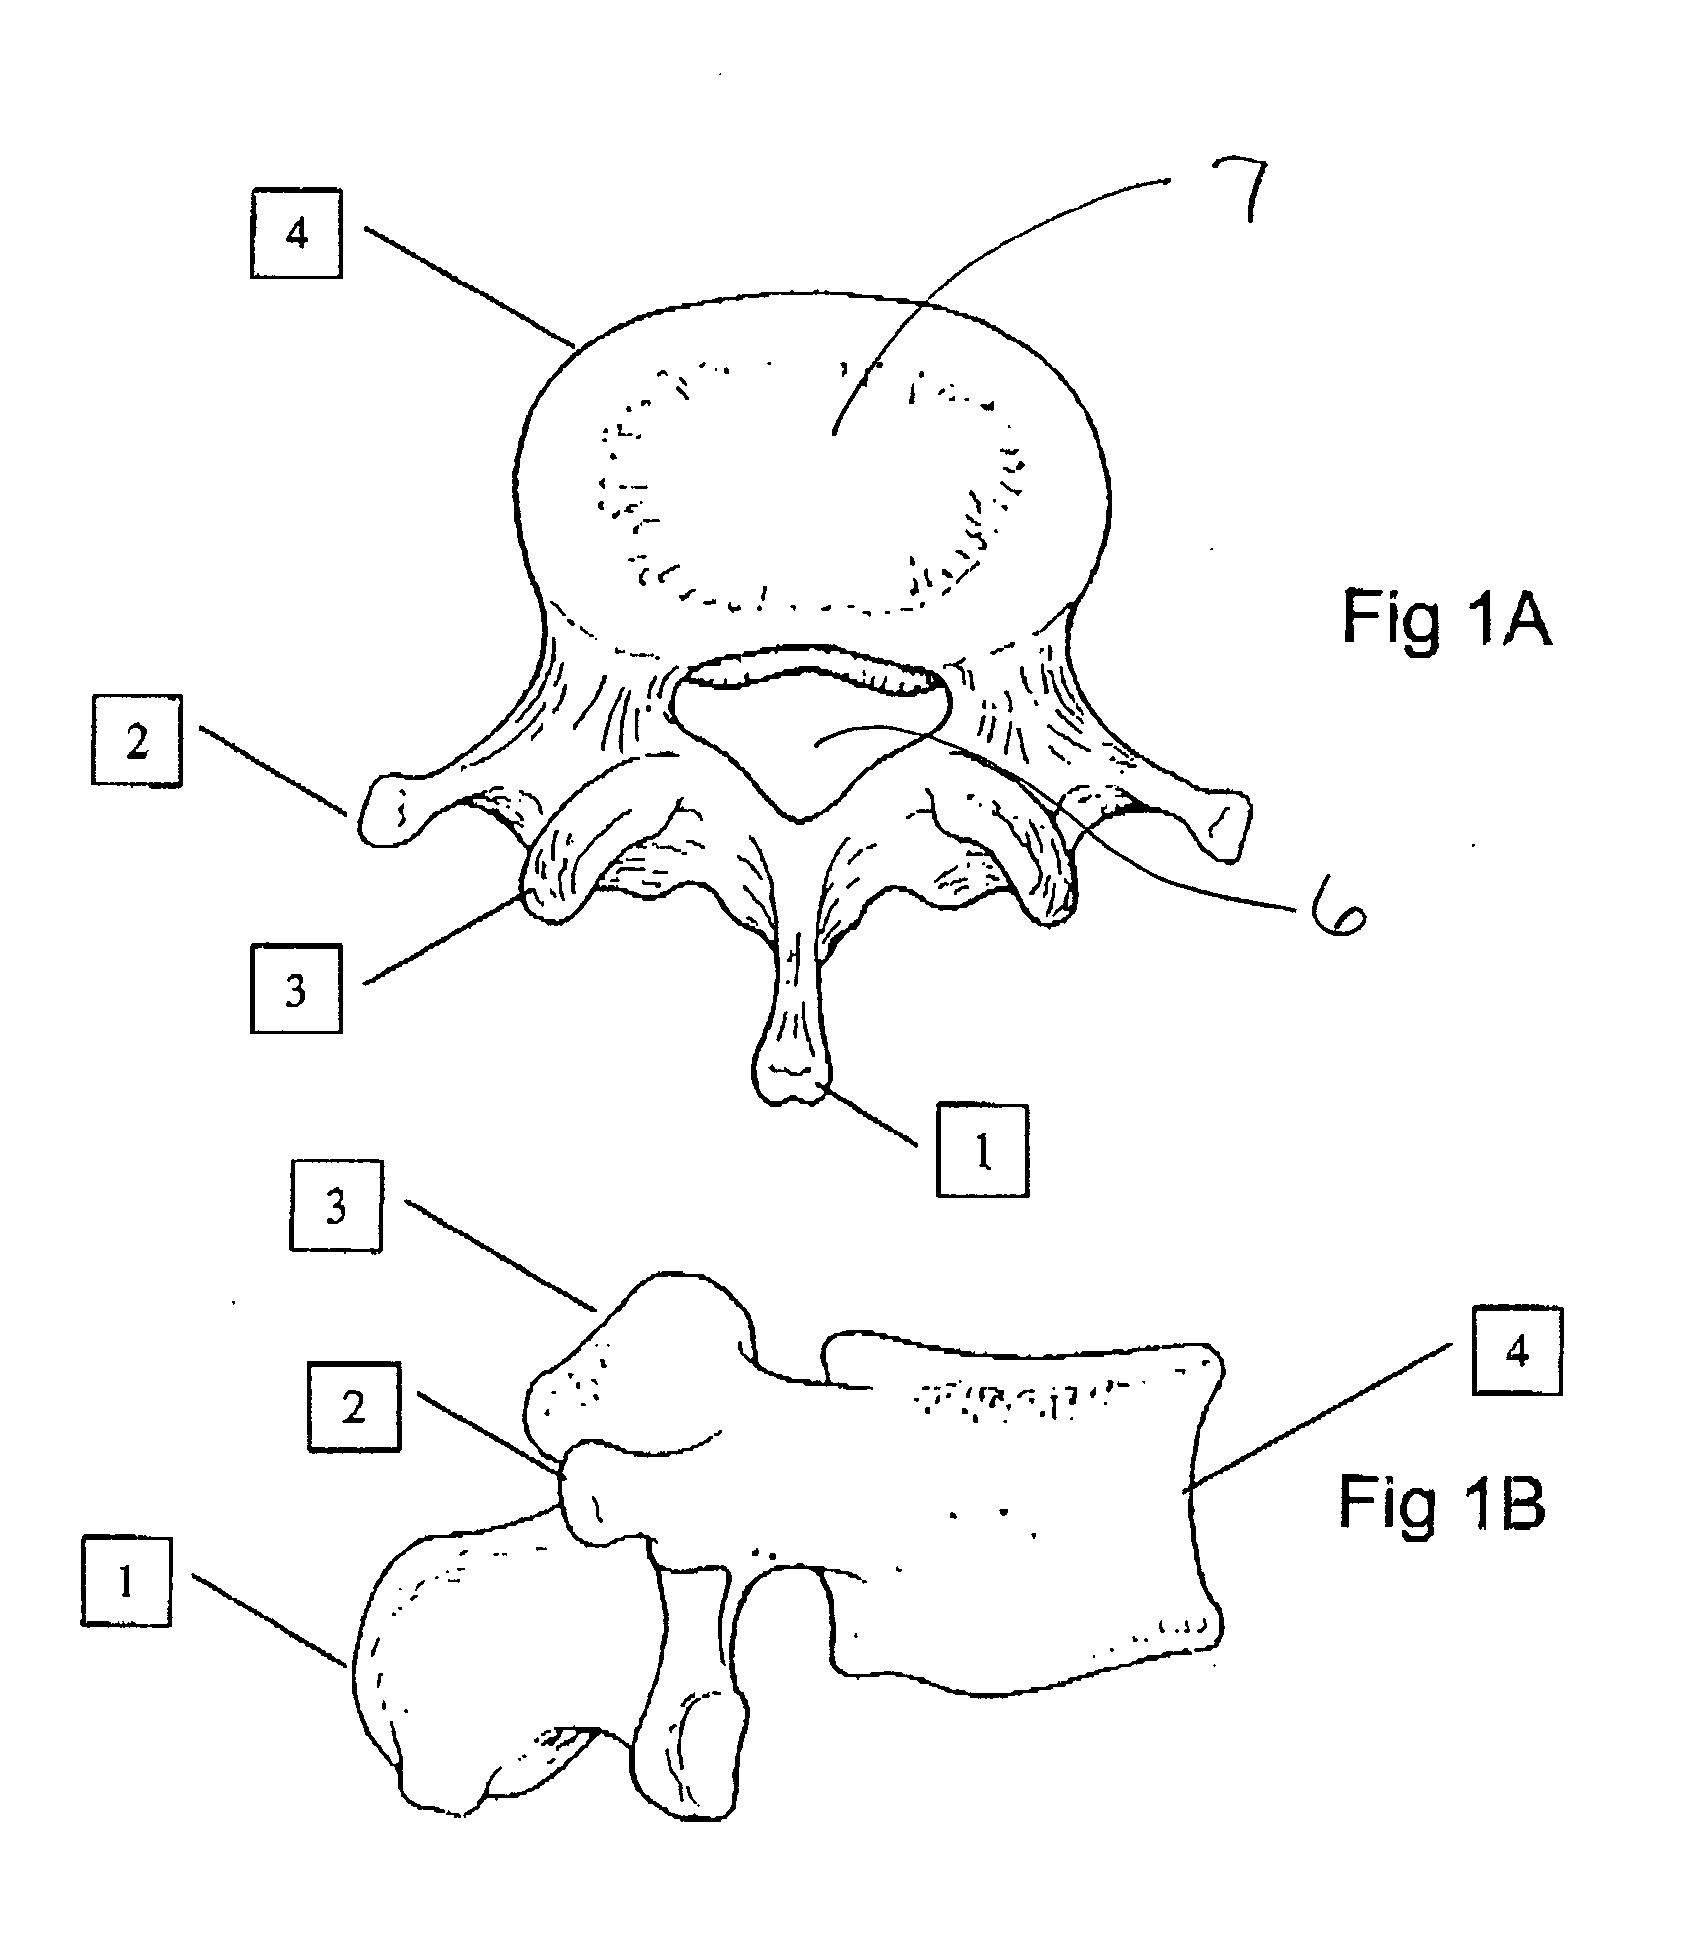 Transosseous spine core approach method implant and instrumentation